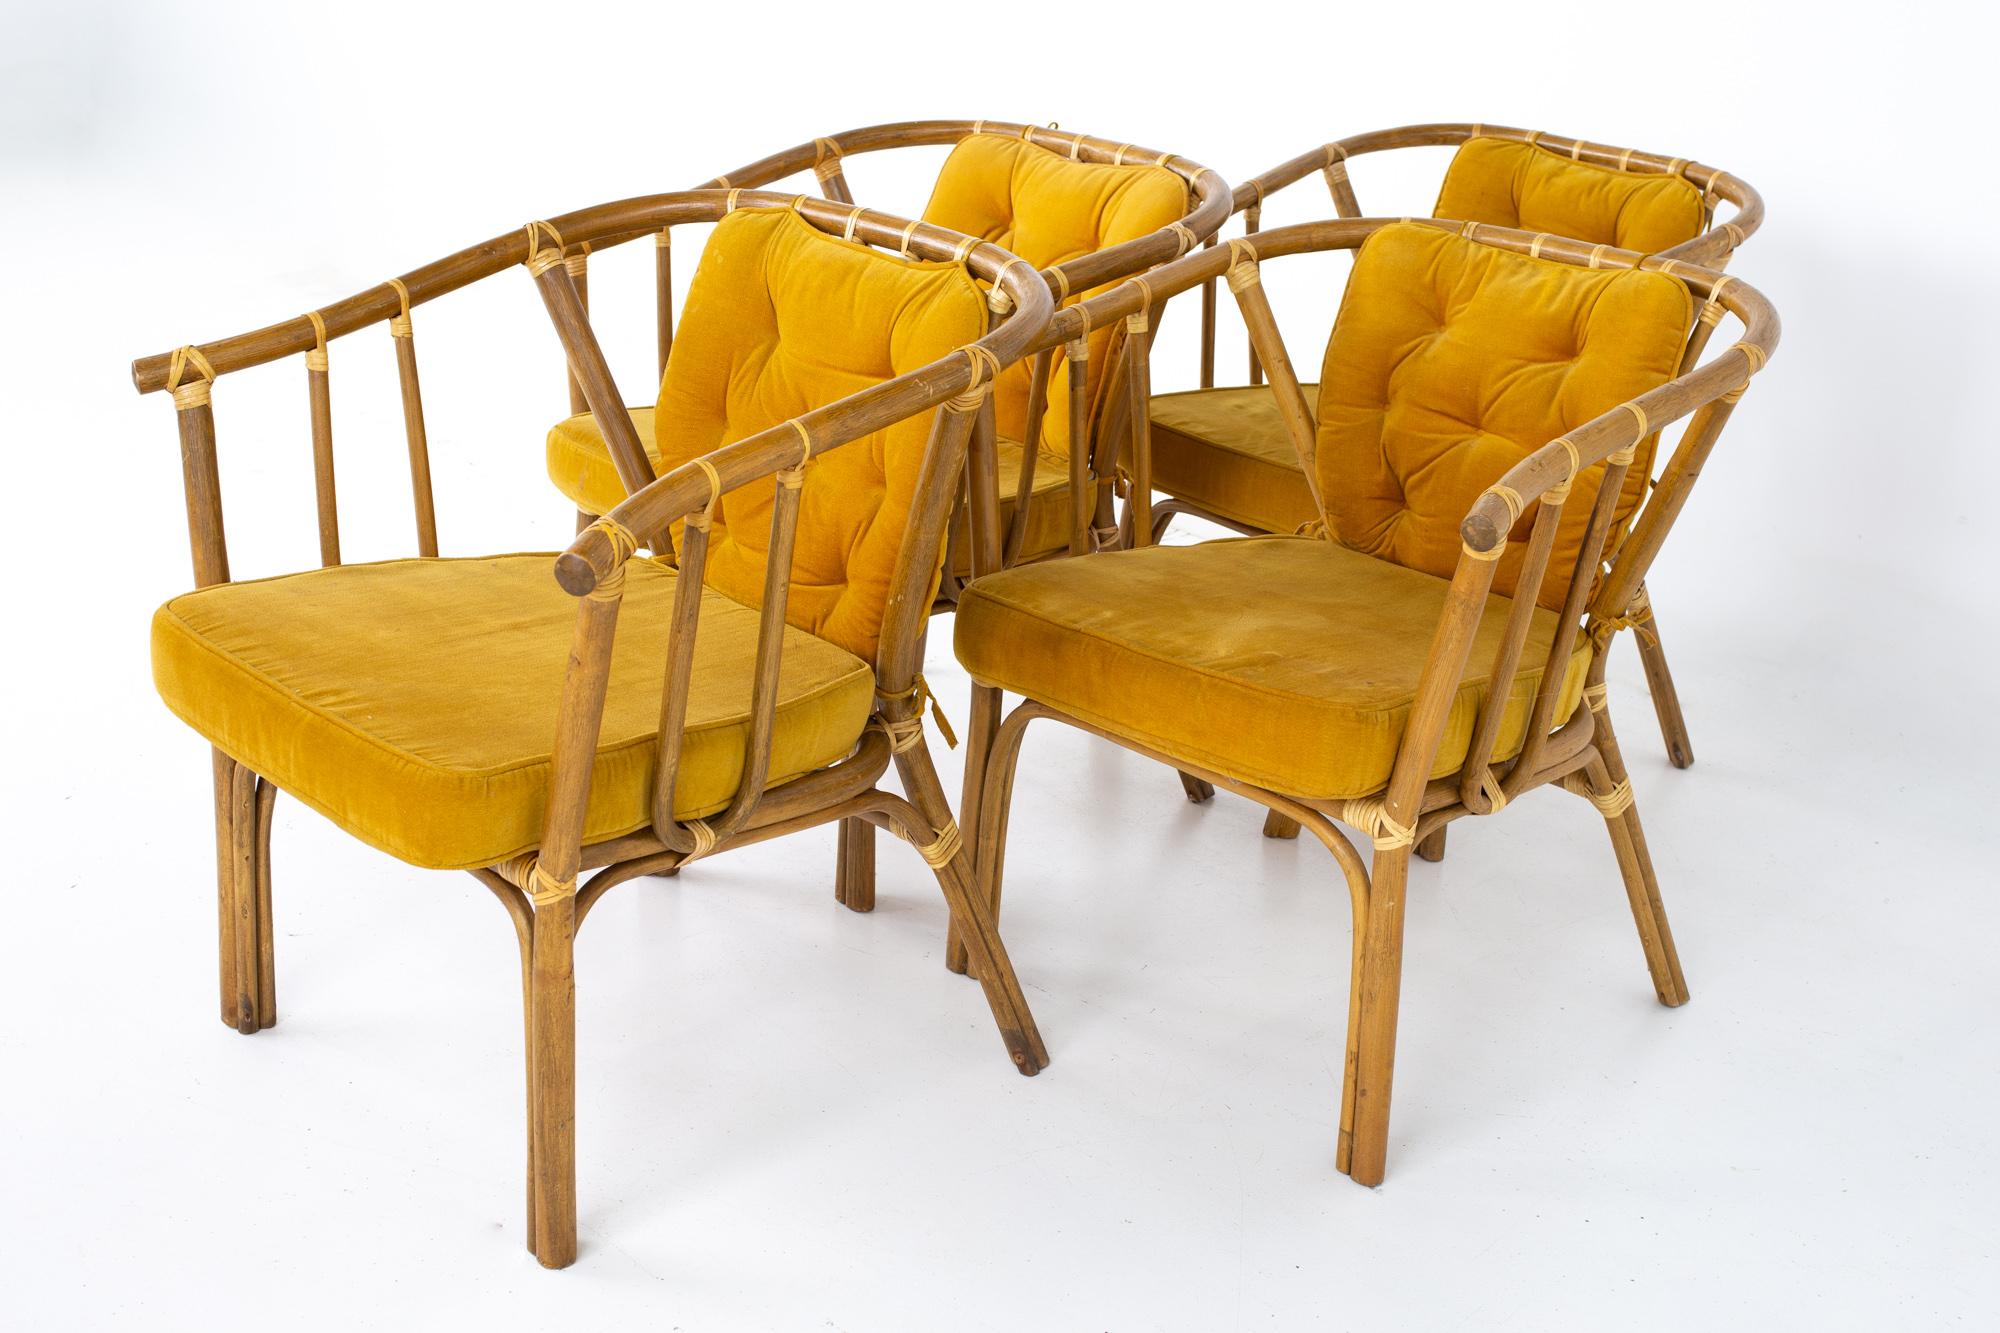 Mid century rattan dining chairs, set of 4
Each chair measures: 26 wide x 25.25 deep x 30 high, with a seat height of 17 inches

All pieces of furniture can be had in what we call restored vintage condition. That means the piece is restored upon